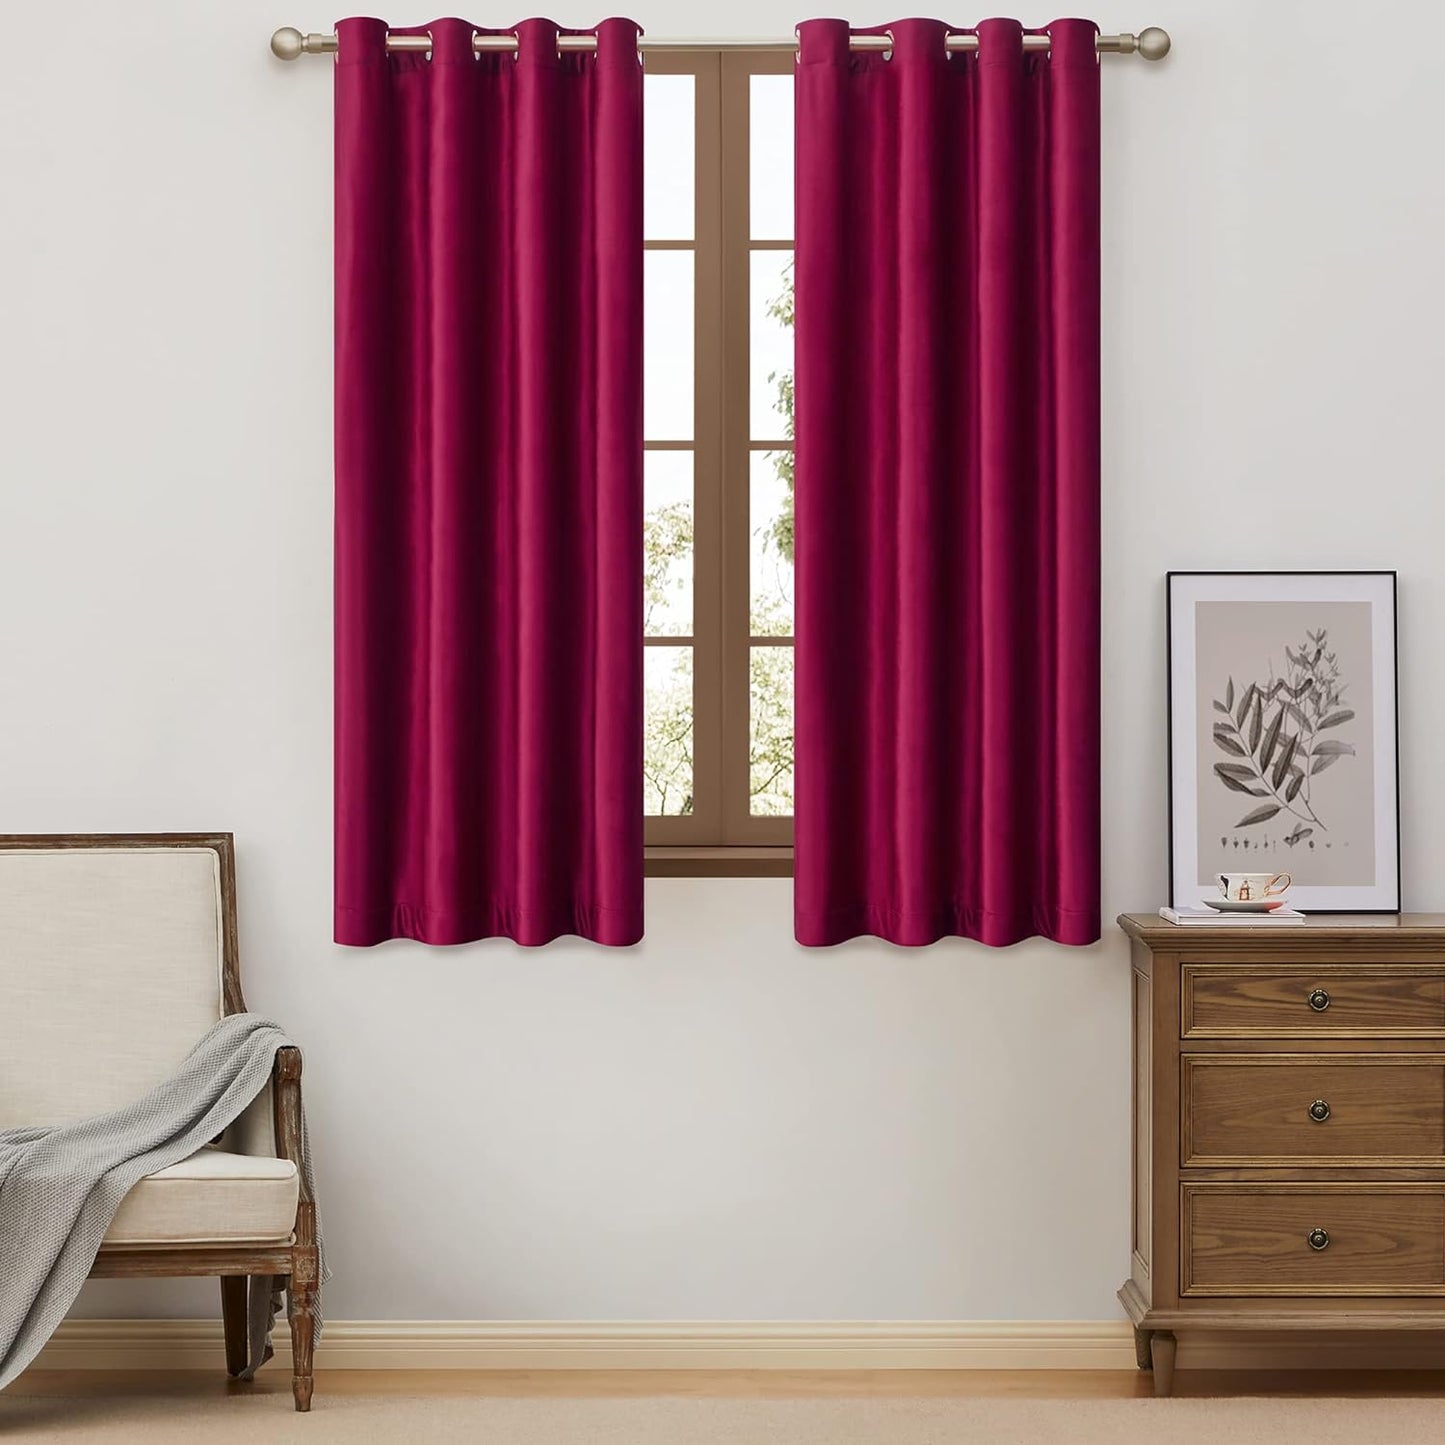 BULBUL Velvet Gold Curtains 84 Inch Length- Living Room Blackout Thermal Window Drapes Darkening Decor Grommet Curtains for Bedroom Set of 2 Panels  BULBUL Ruby Red 52"W X 63"L 